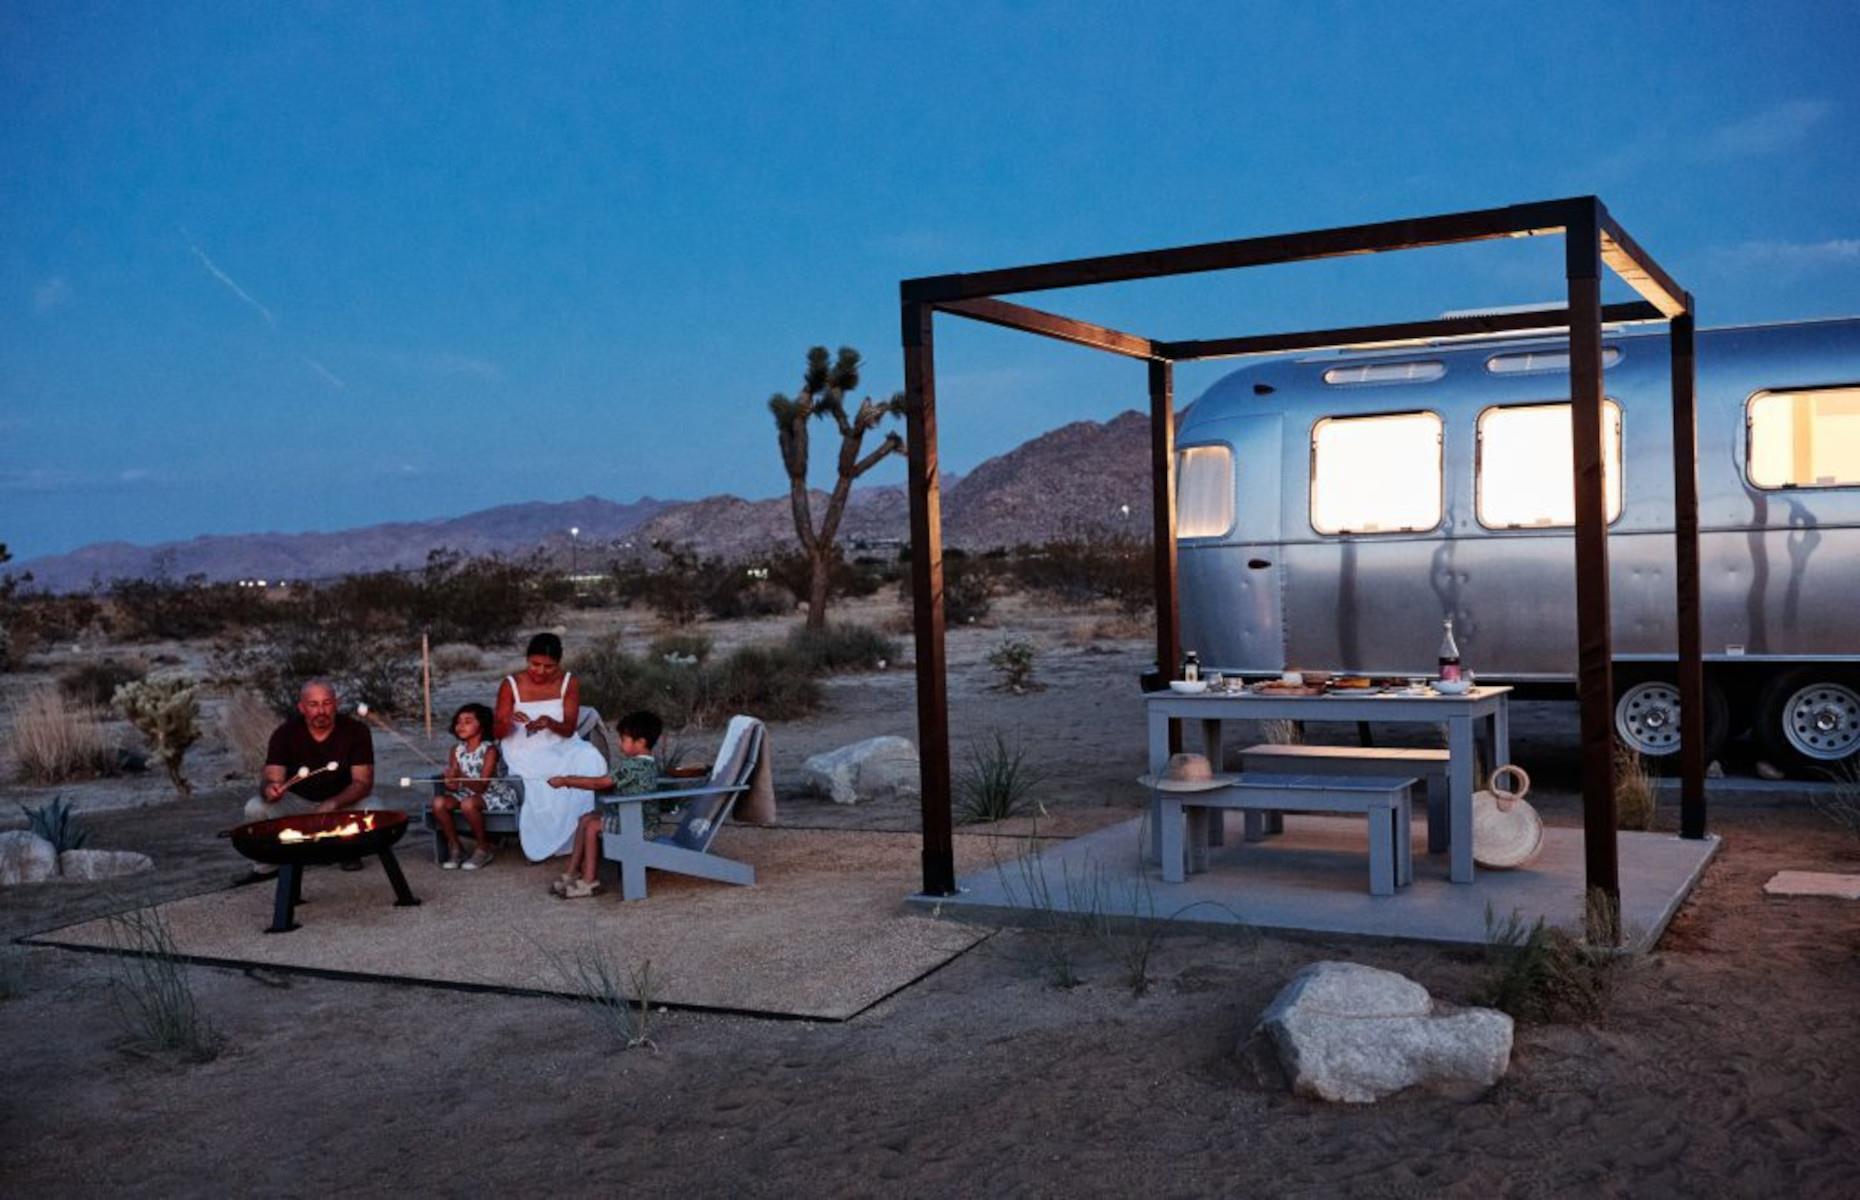 <p>Just outside of Joshua Tree National Park, a campsite of luxury Airstreams offers guests the chance to sleep under the stars, surrounded by the stunning desert landscape. <a href="http://autocamp.com/property/premium-airstream-suite/">Available to rent</a>, the stunning trailers are a beautifully updated homage to the original Airstream design.</p>